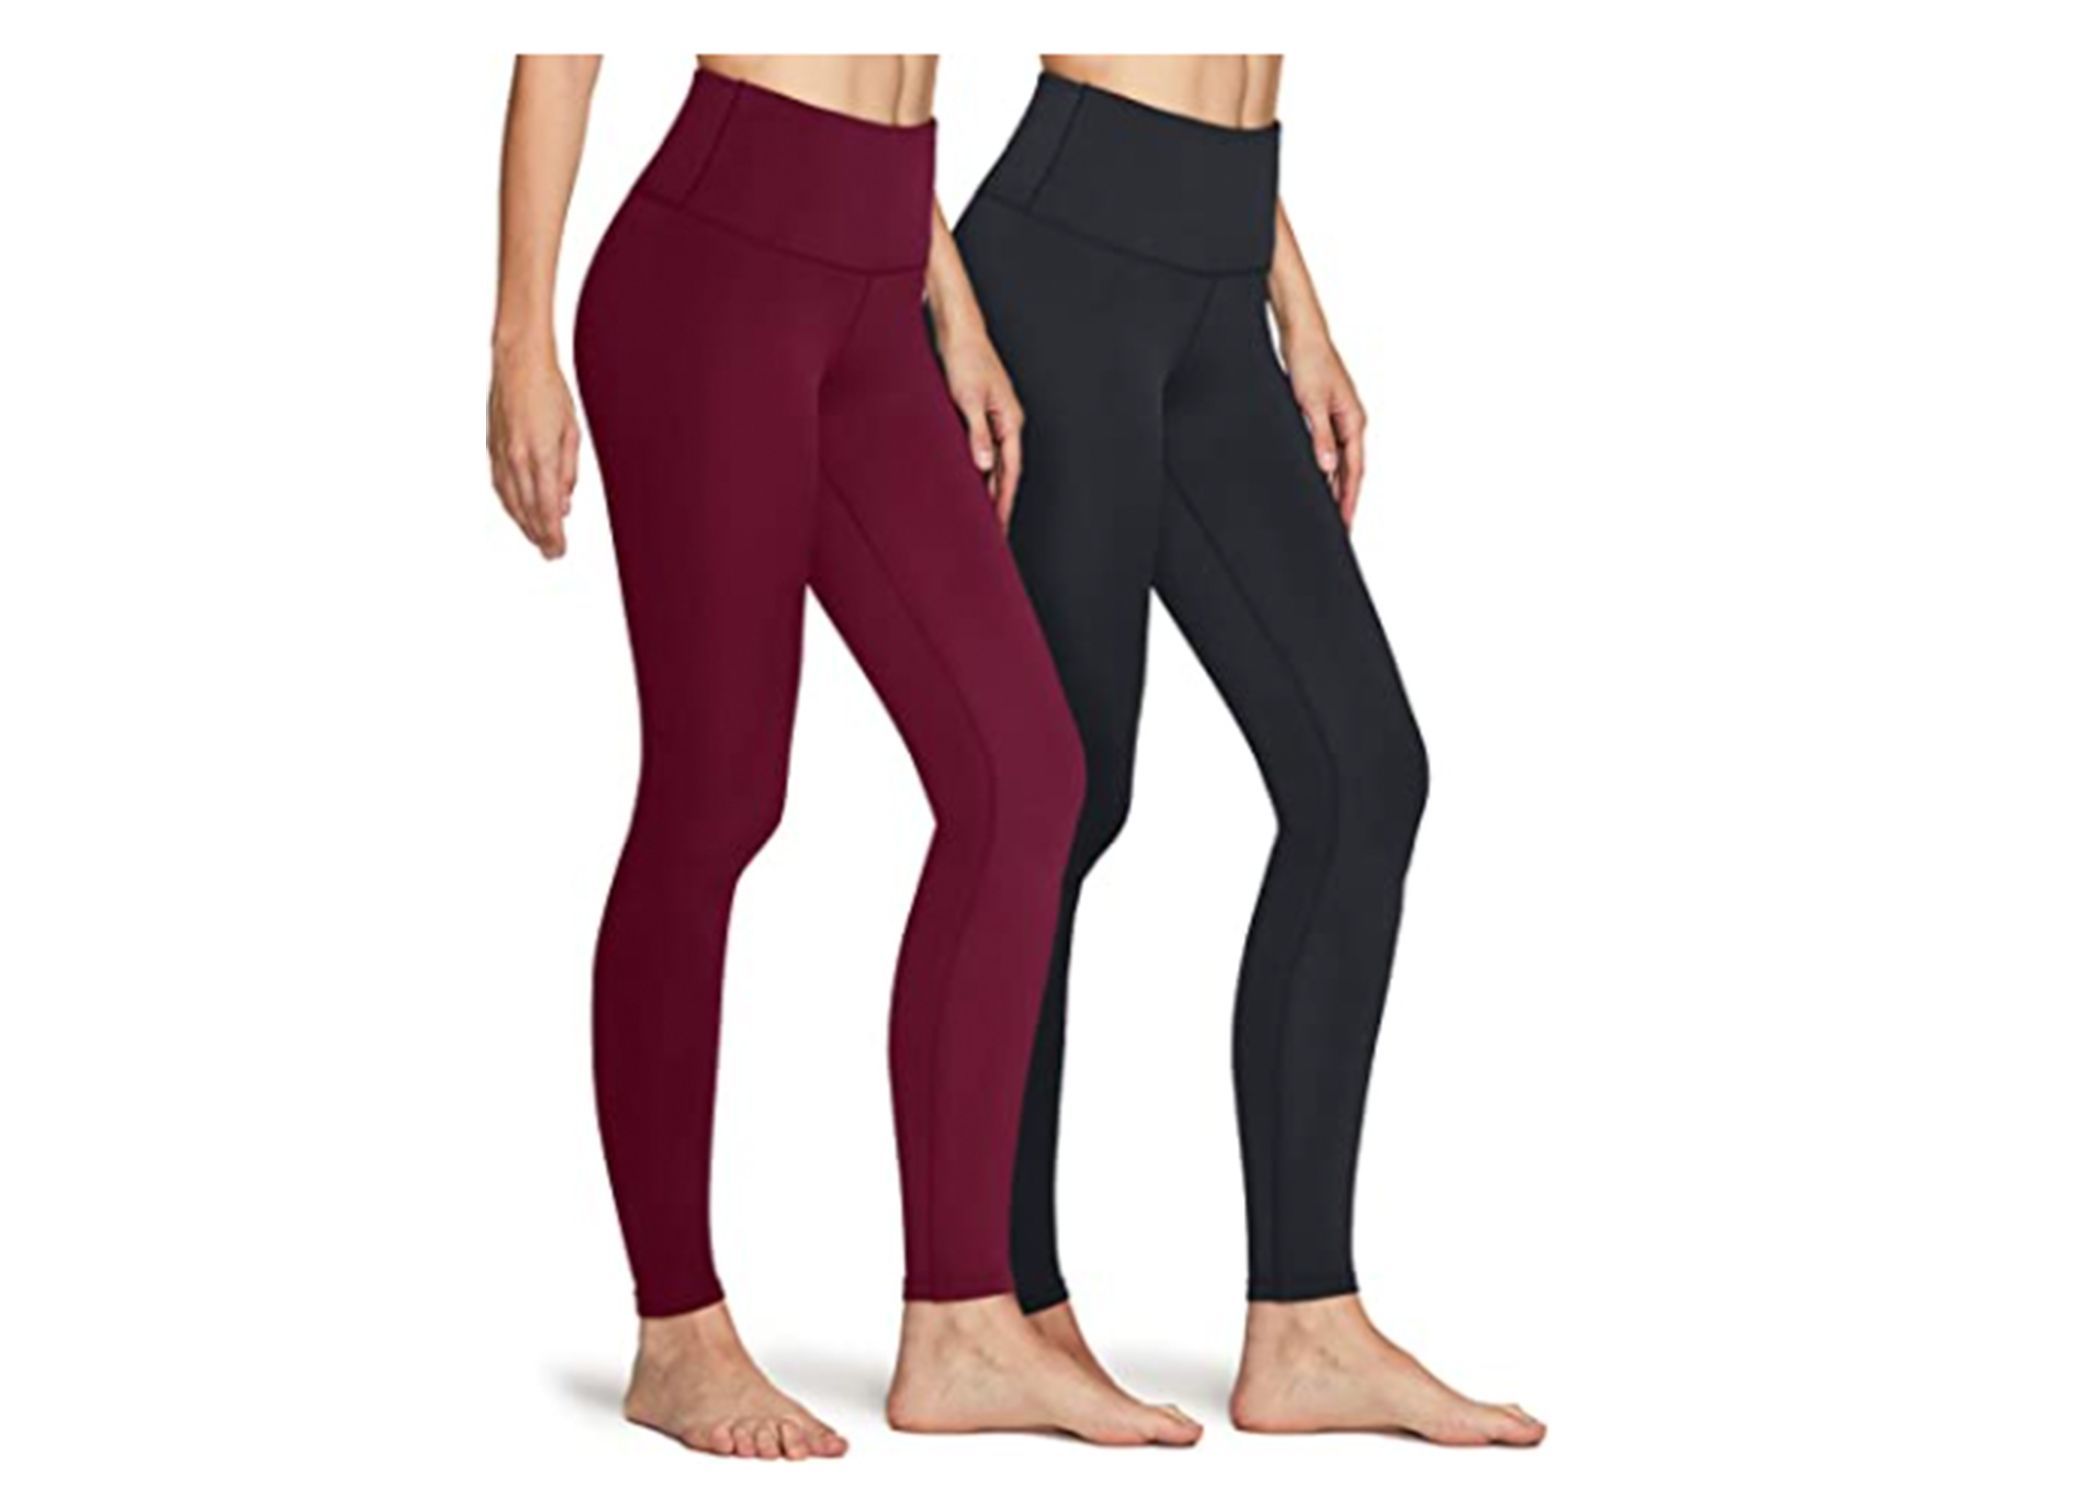 13 Best Fleece-Lined Leggings to Stay Warm in Cold Weather 2023